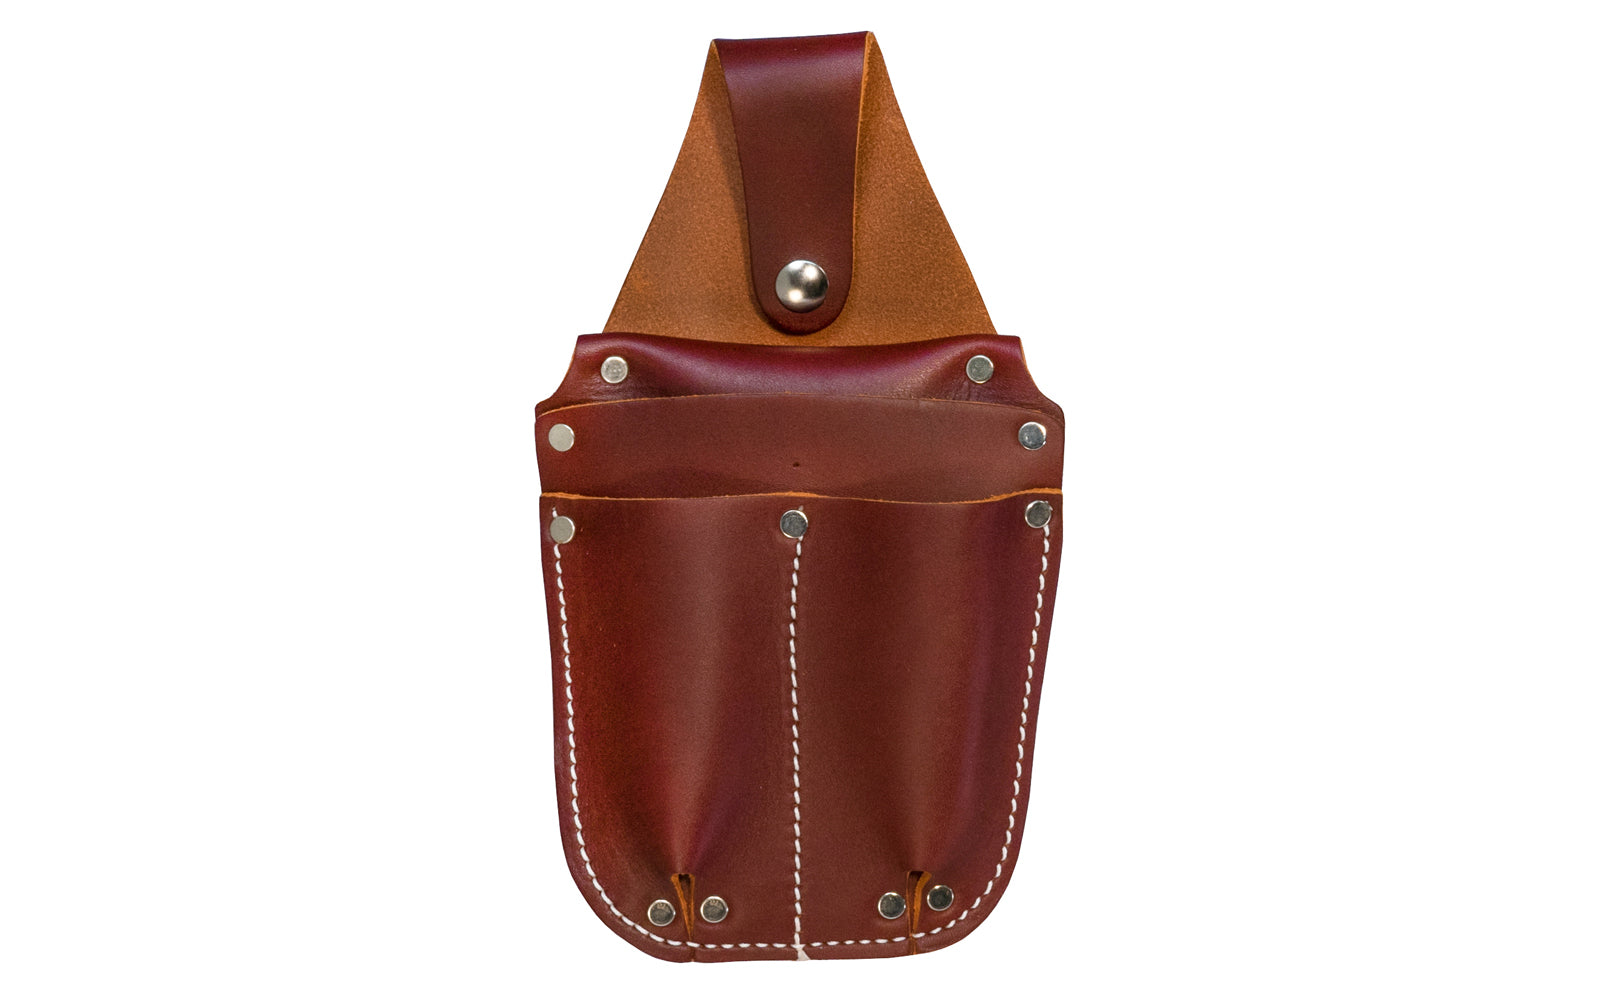 Occidental Leather 4-pocket Organizer Caddy ~ 5057 - Fits up to 2" work belt - Fits in your pocket - Leather Pocket Organizer - Riveted - Holster - Hand Made - Leather - Occidental Holder - Occidental Leather Pocket Caddy - Tool Holder - Ideal for small repair work, shop workers, gardeners, farm repair, & cabinetmakers